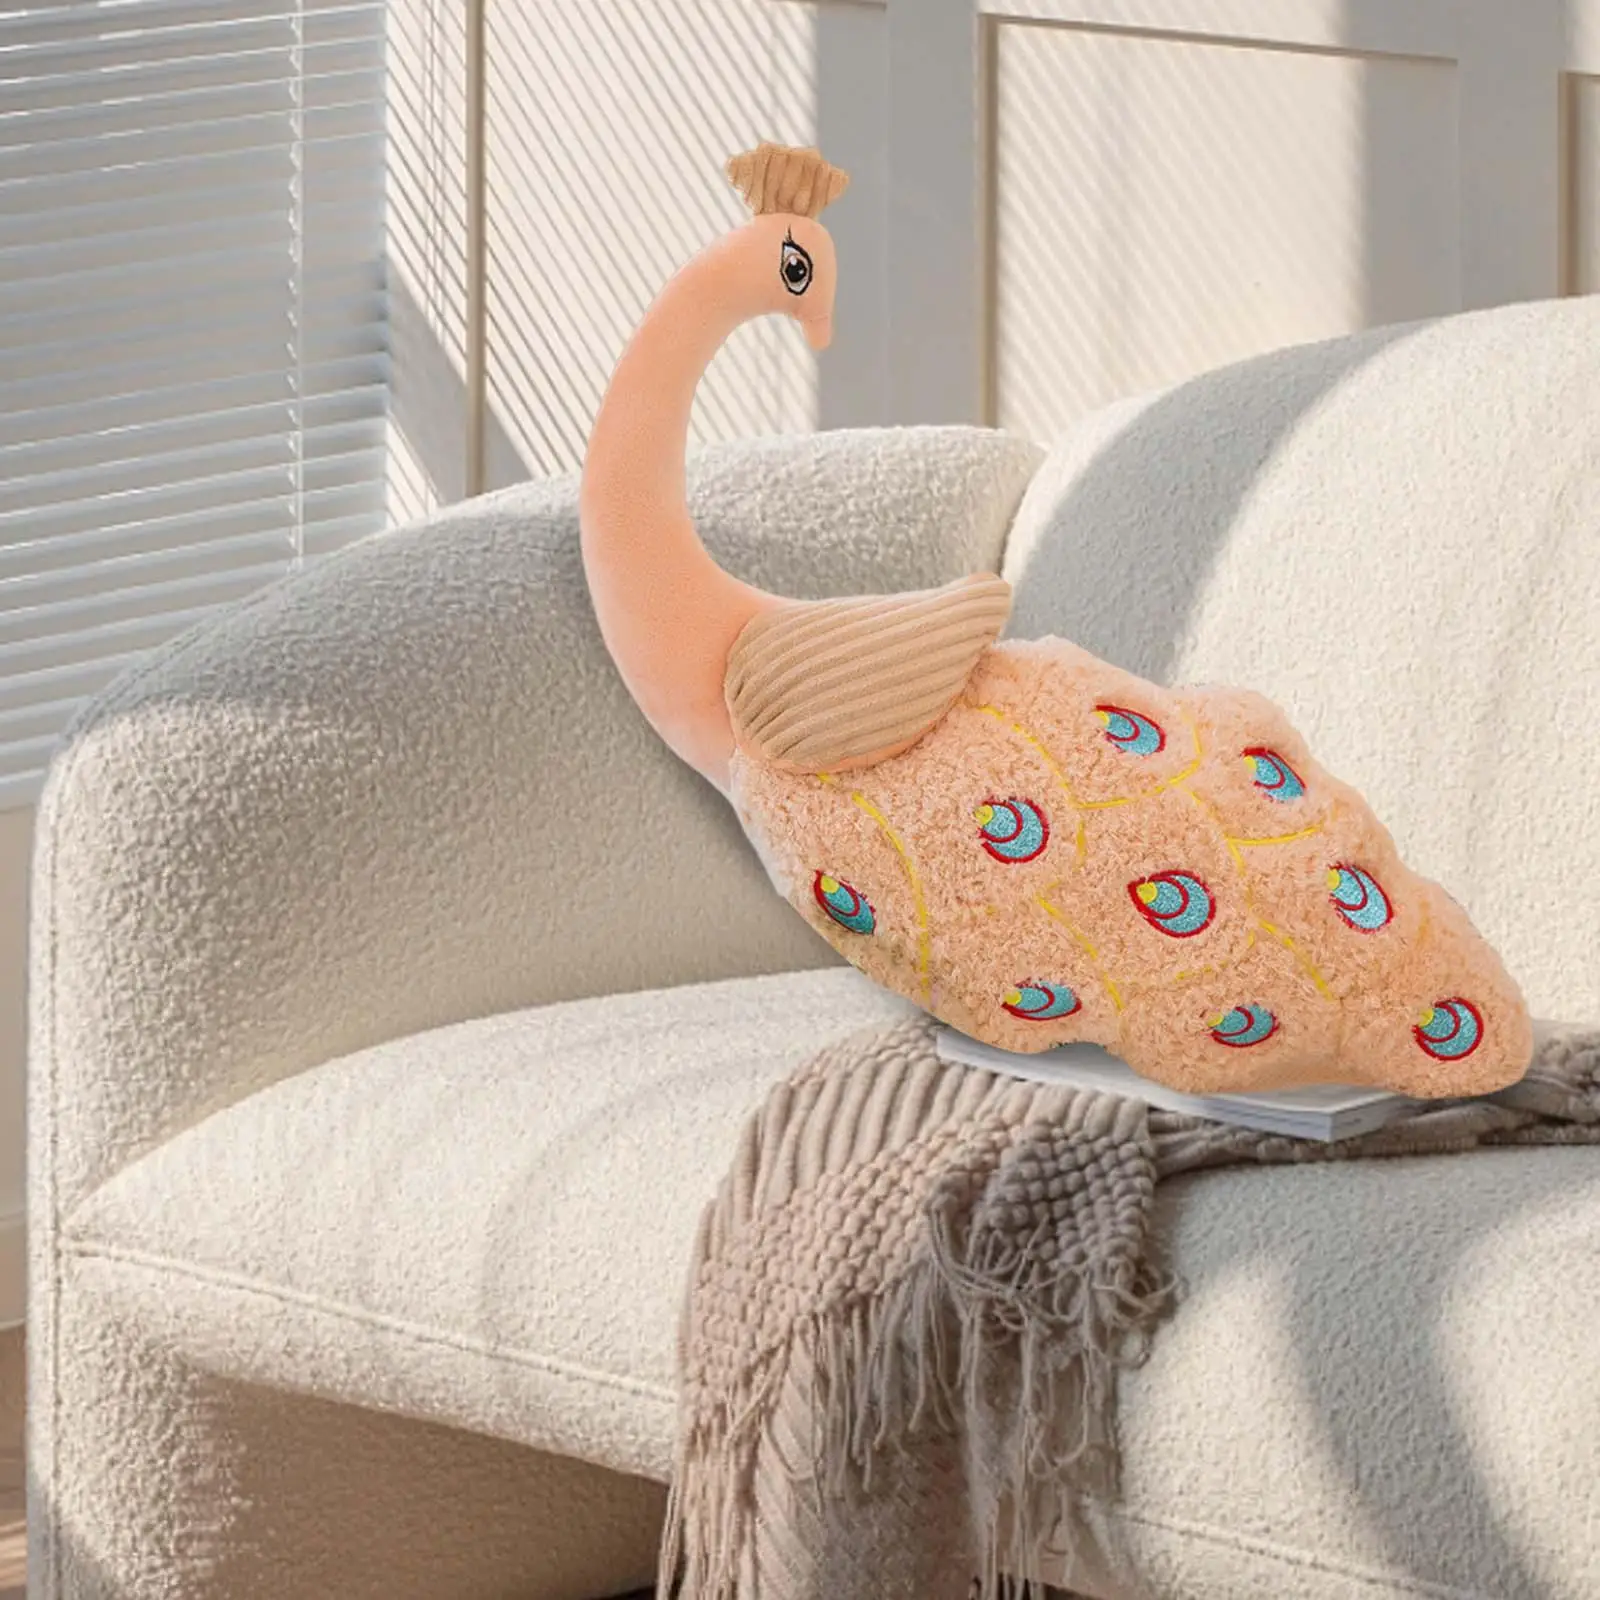 Peacock Decorative Pillow Bird Pillow Throw Pillow Surface Washable and Easy to Clean for Bedroom Housewarming Gift Firm Stuffed